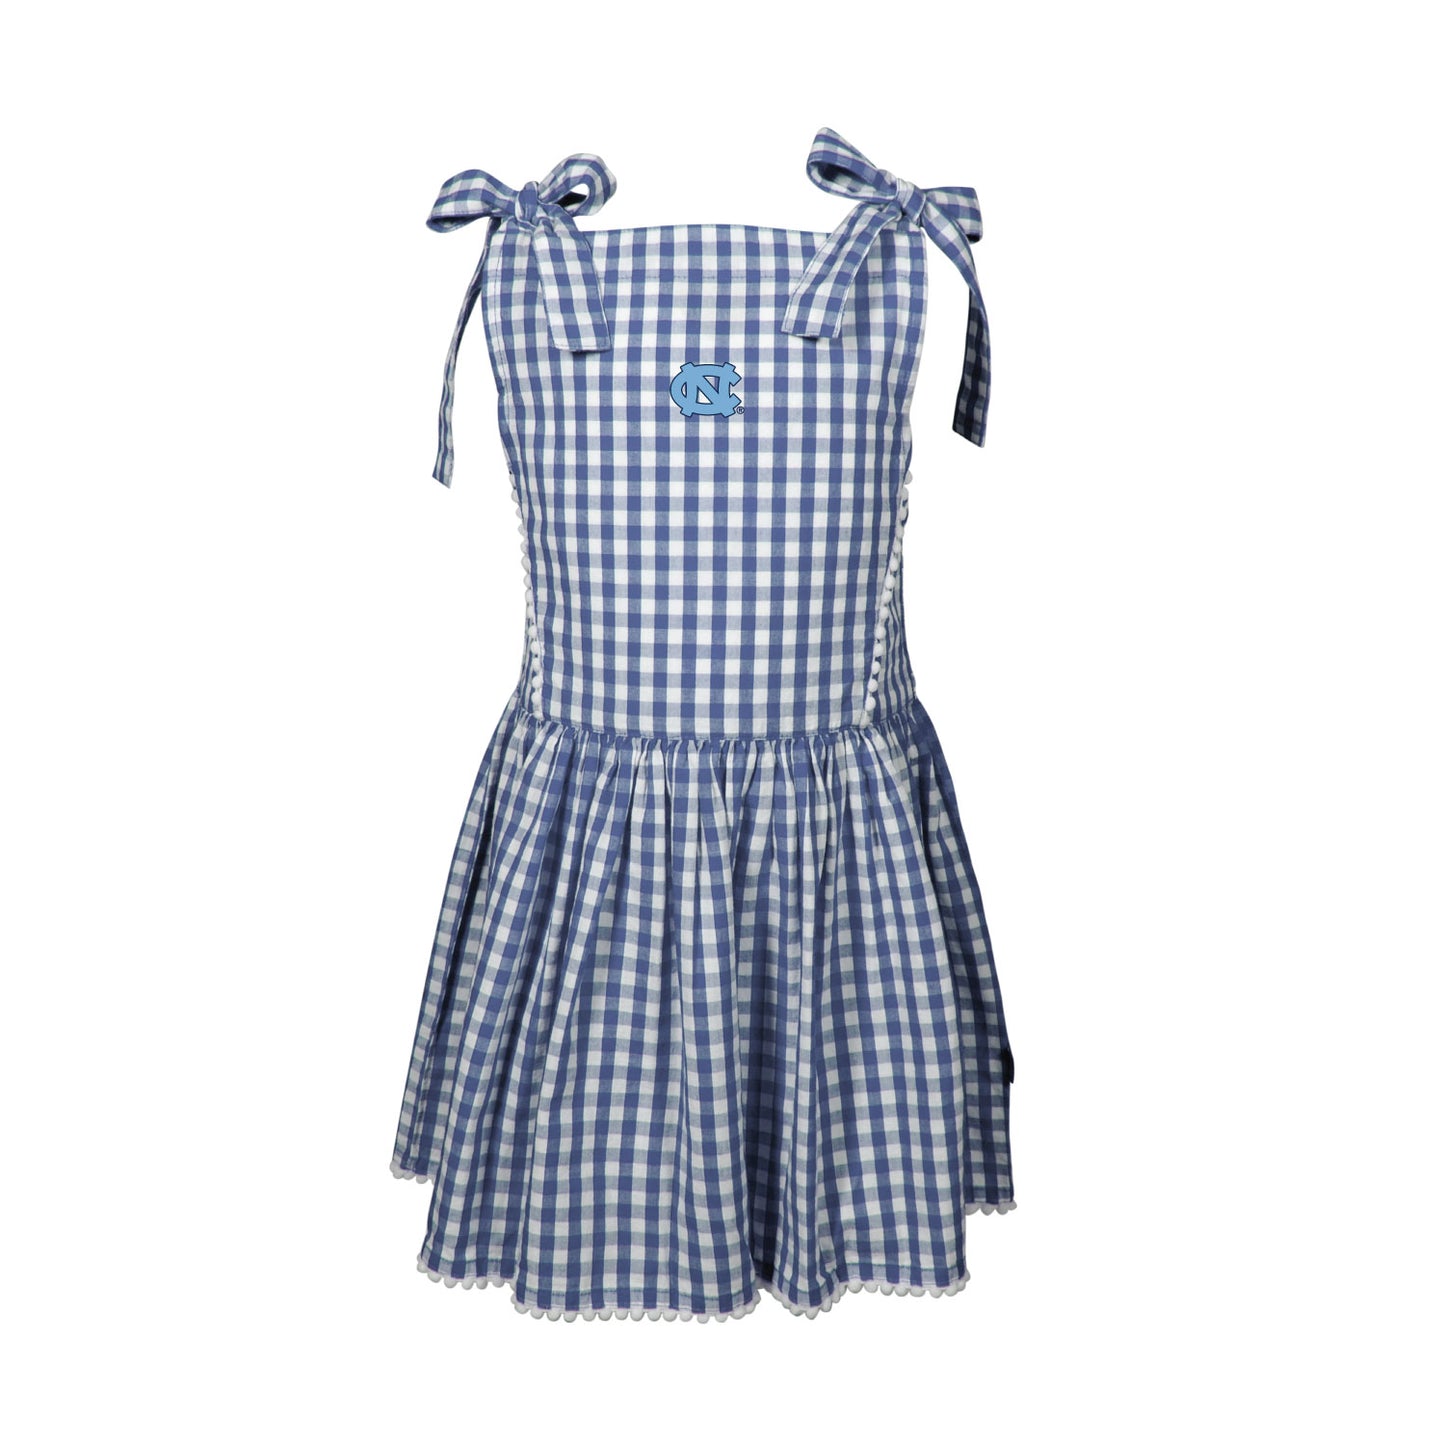 North Carolina Tar Heels Toddler Dress with Gingham Blue Pattern and UNC Logo